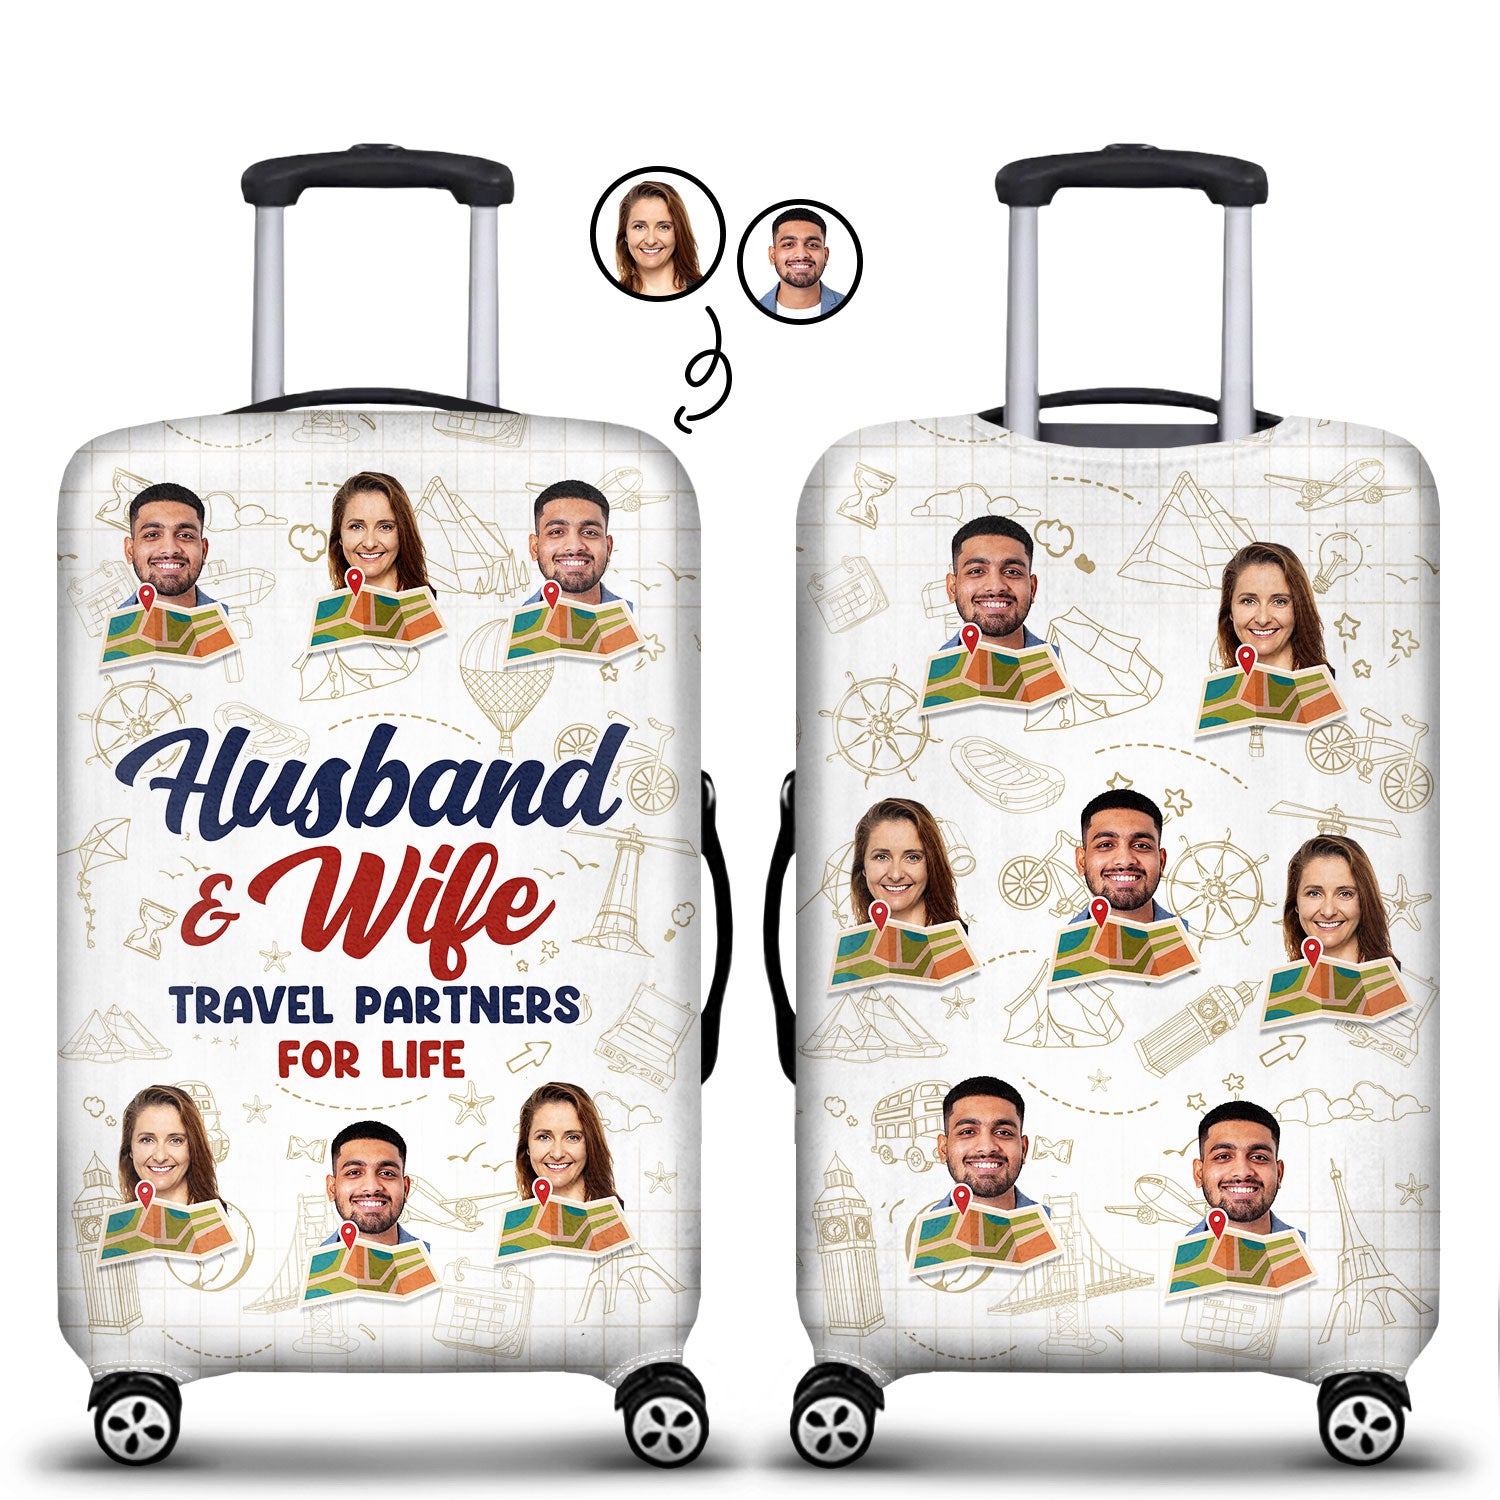 Custom Photo Husband & Wife Travel Partners For Life - Birthday, Anniversary Gift For Travel Couples - Personalized Luggage Cover